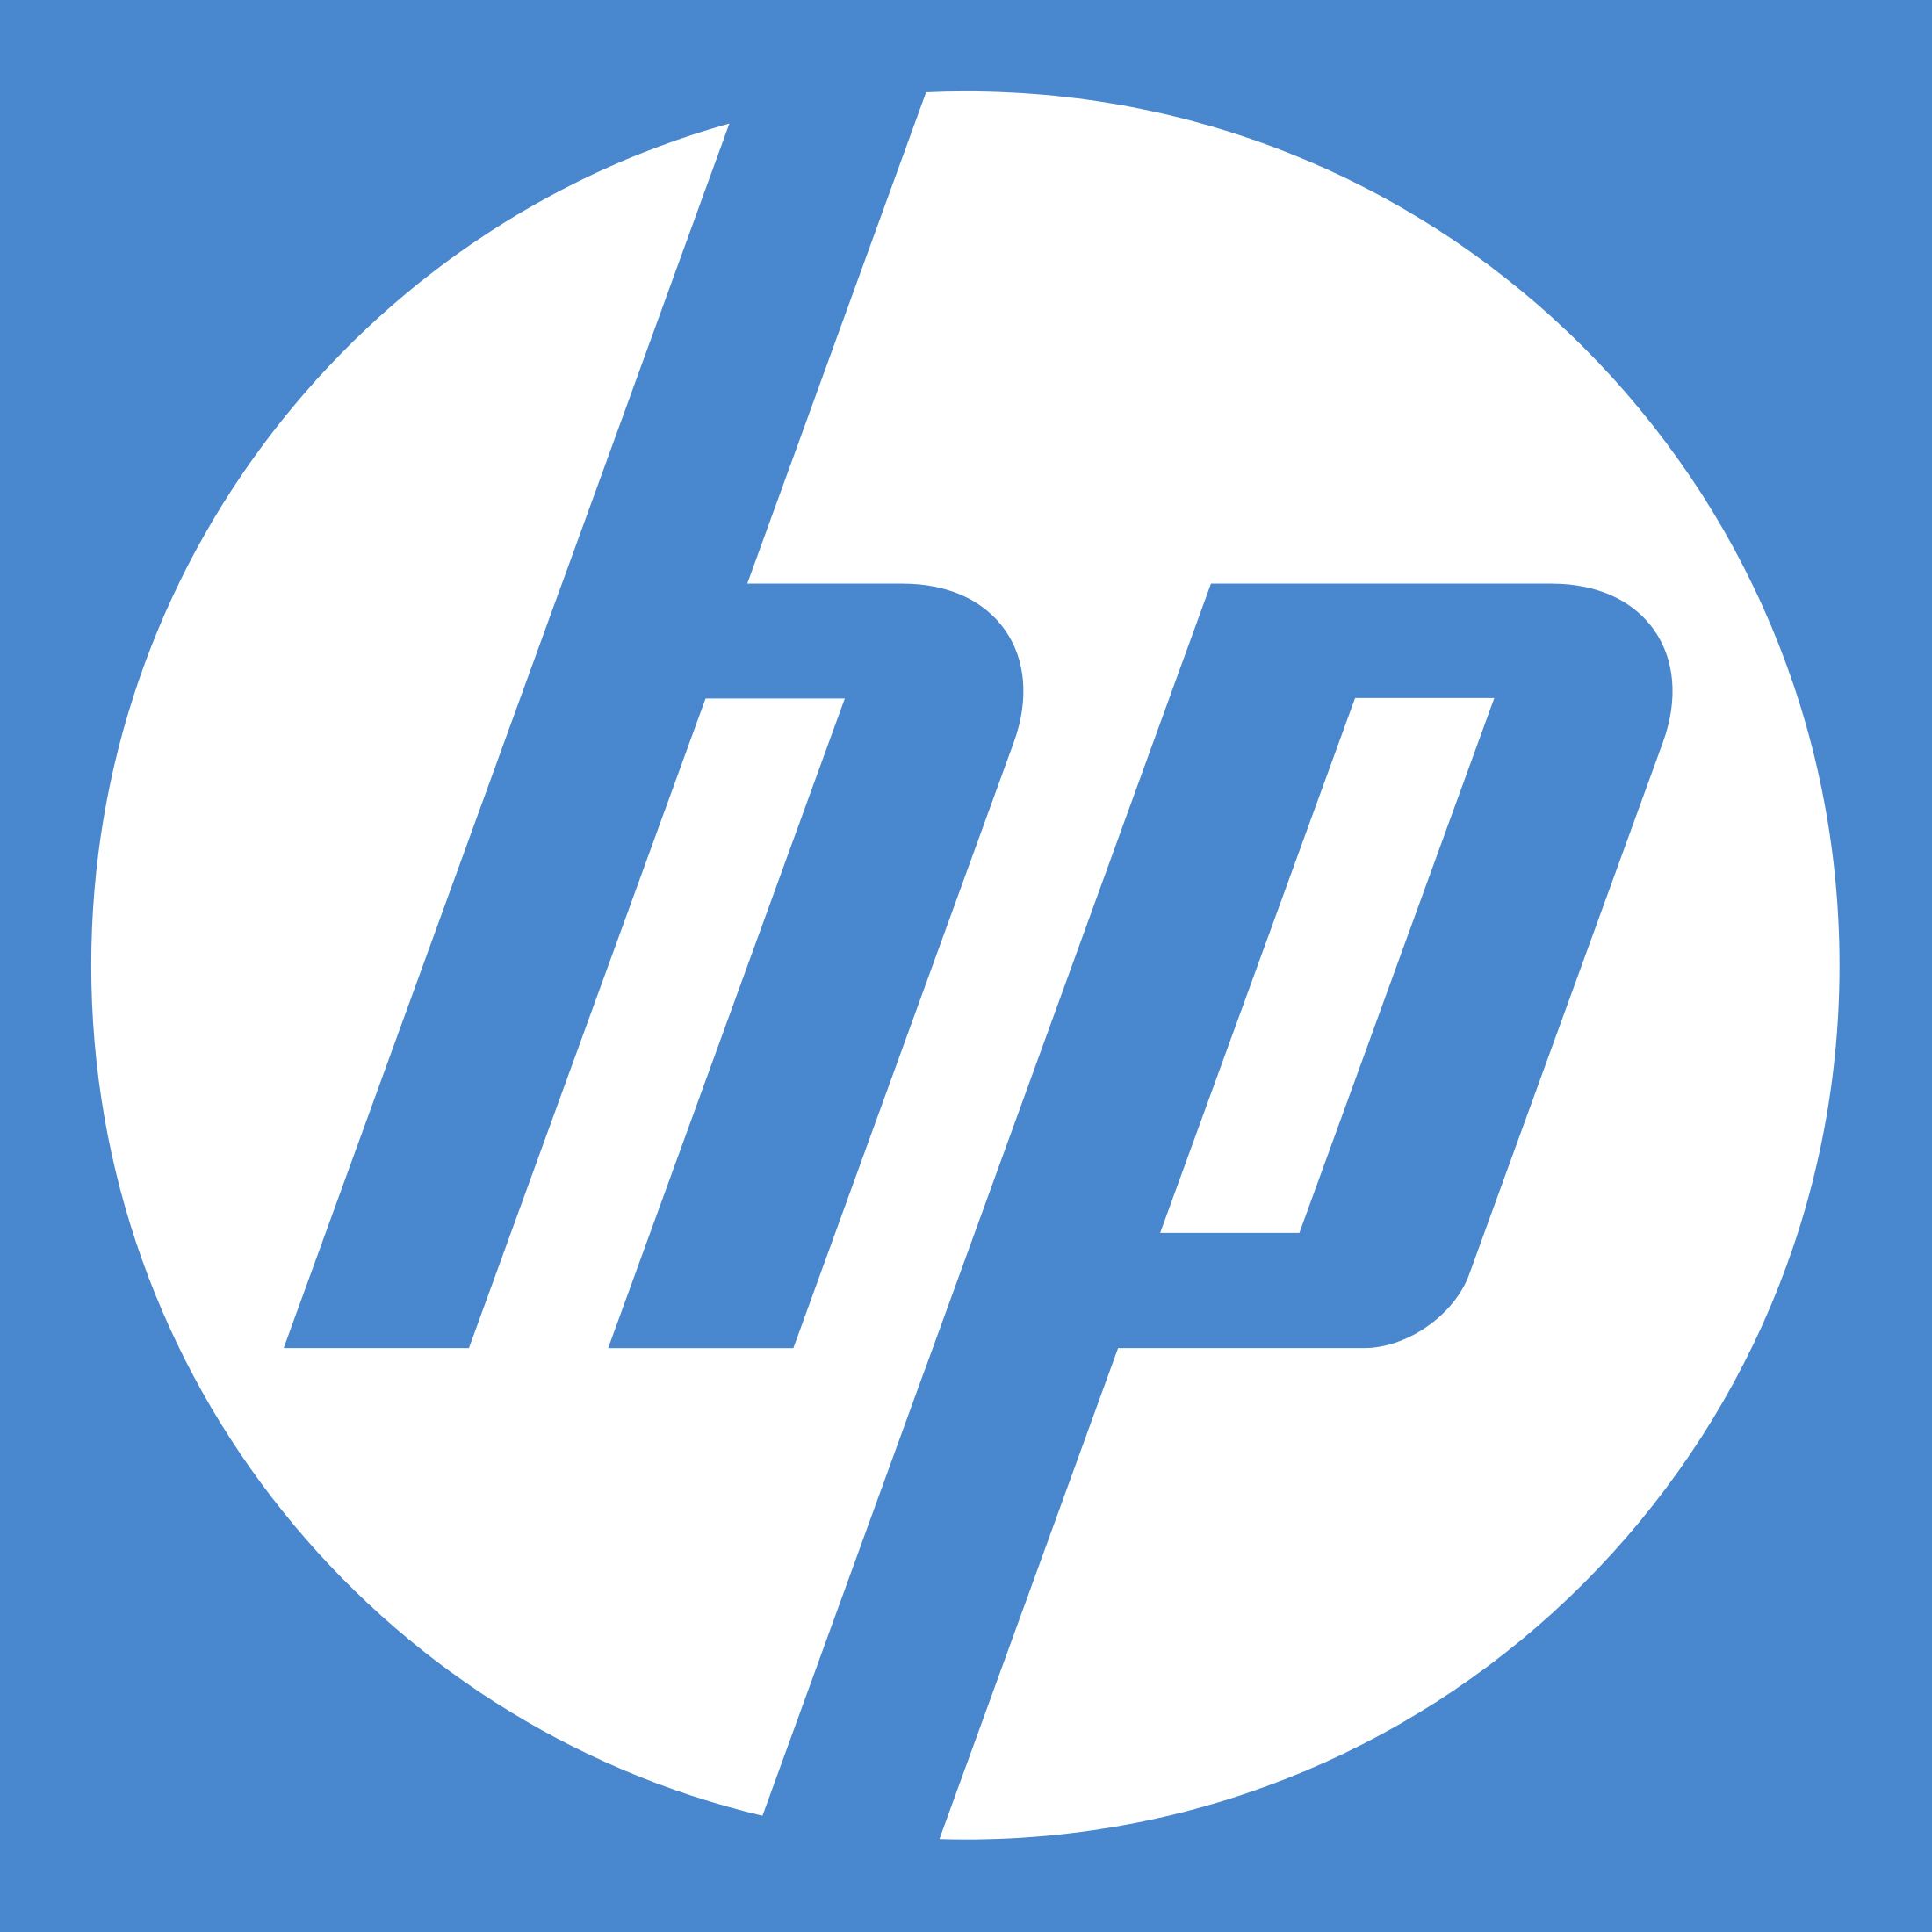 New HP Logo - HP Logo, Hewlett Packard Symbol Meaning, History And Evolution